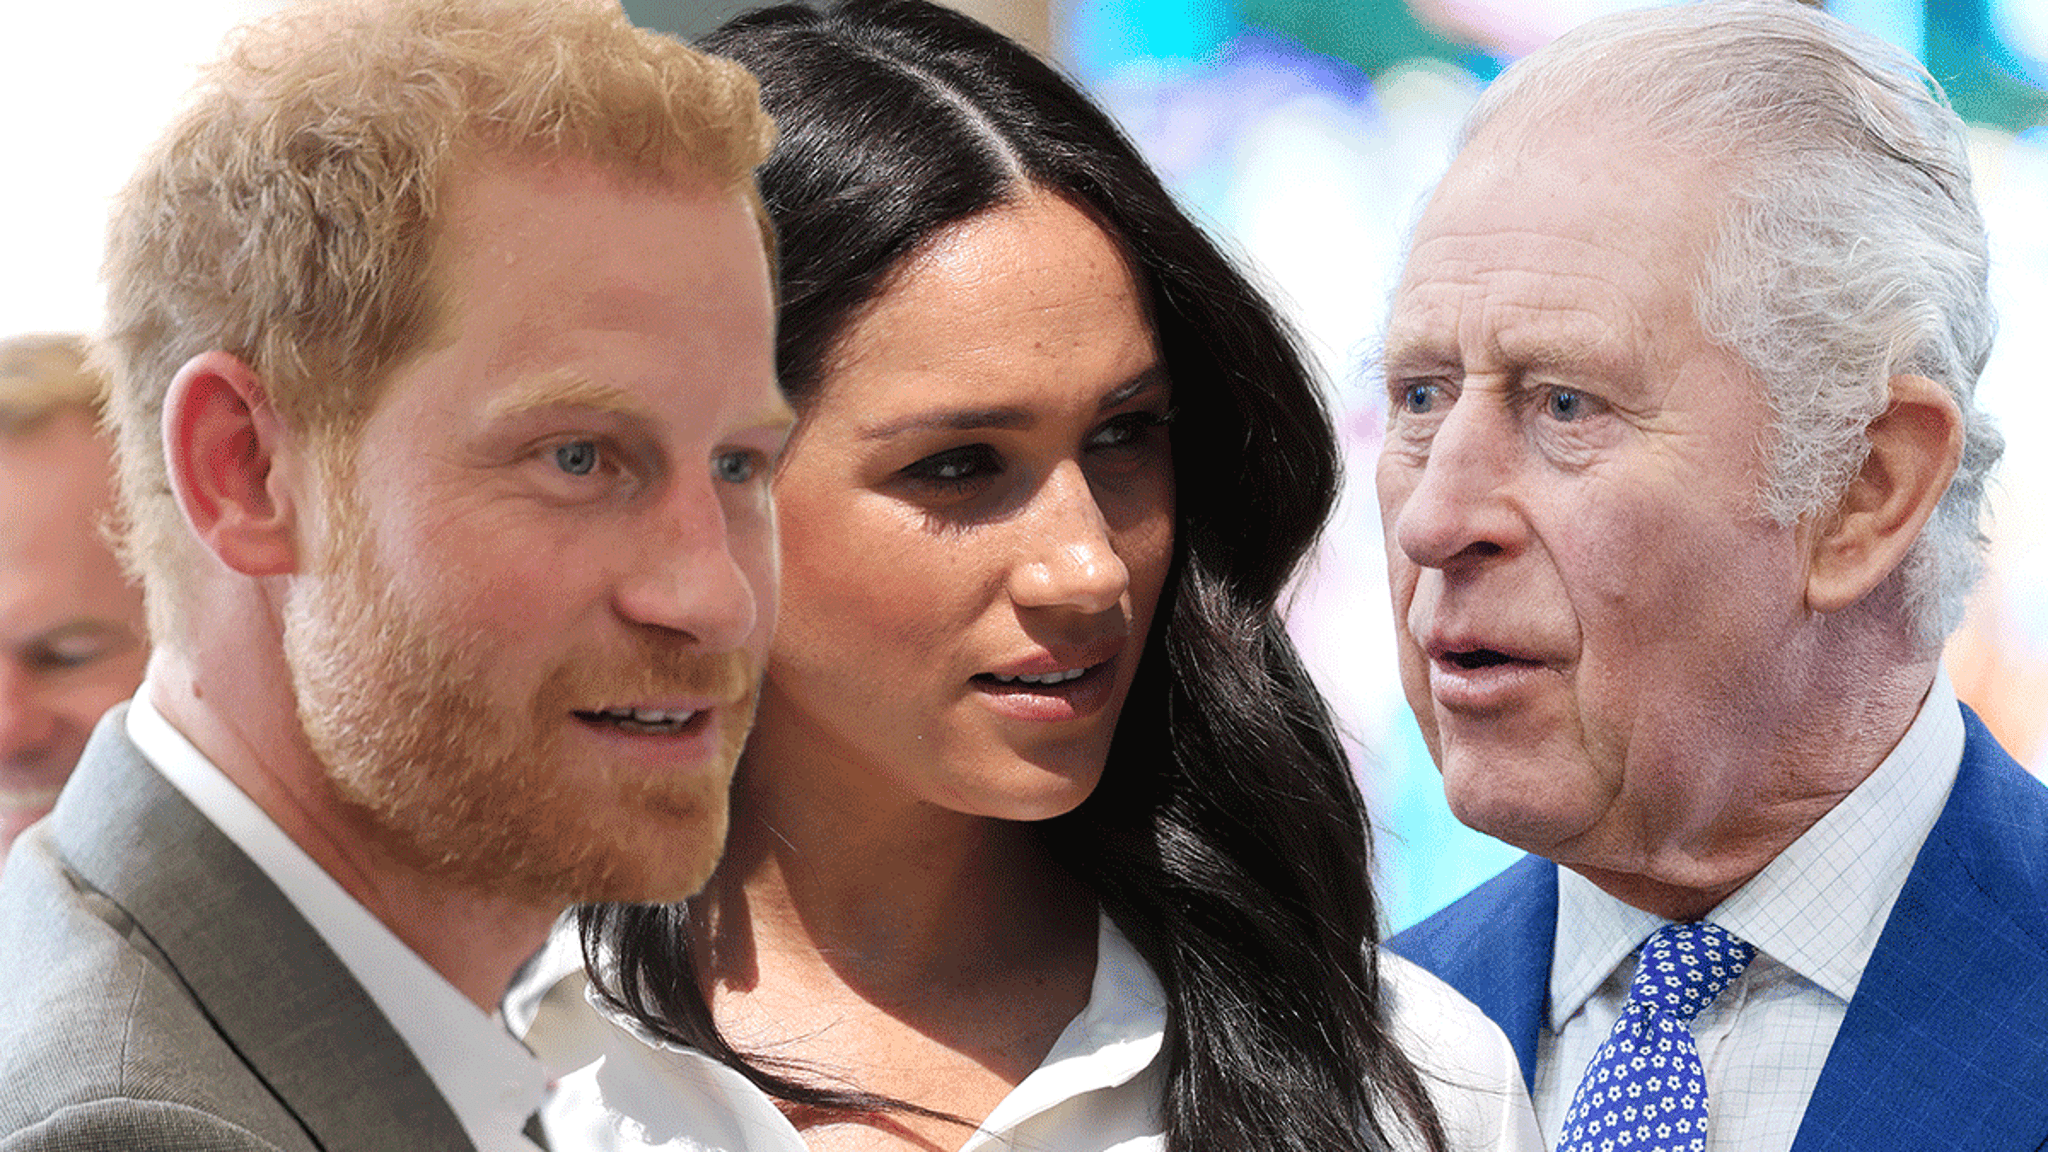 Harry & Meghan’s Chances at King Charles’ Coronation Invite in Question